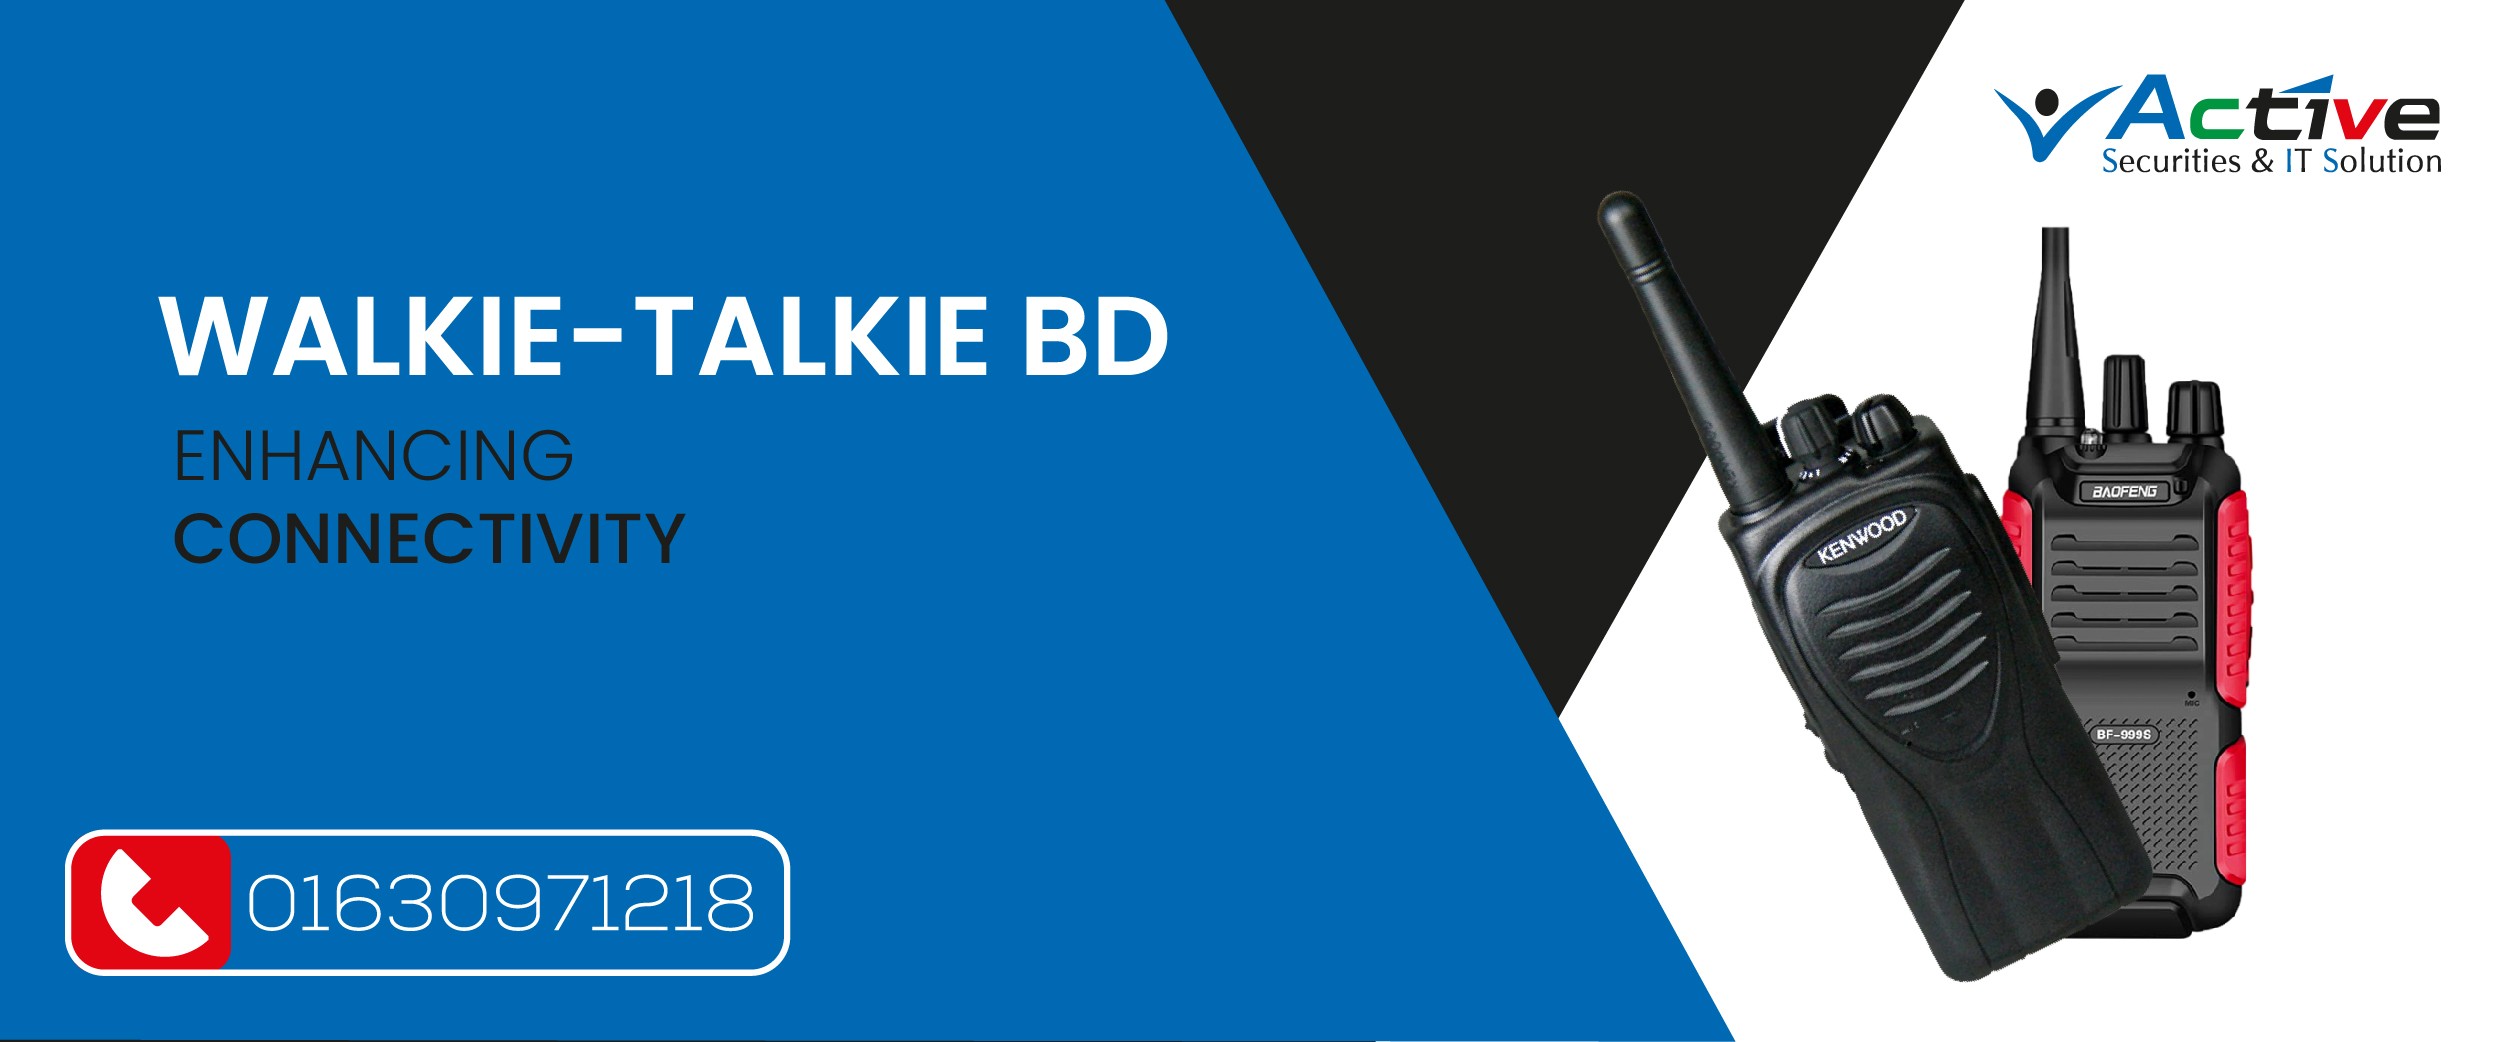 Walkie-Talkie BD - Enhancing Connectivity | Authorized Supplier